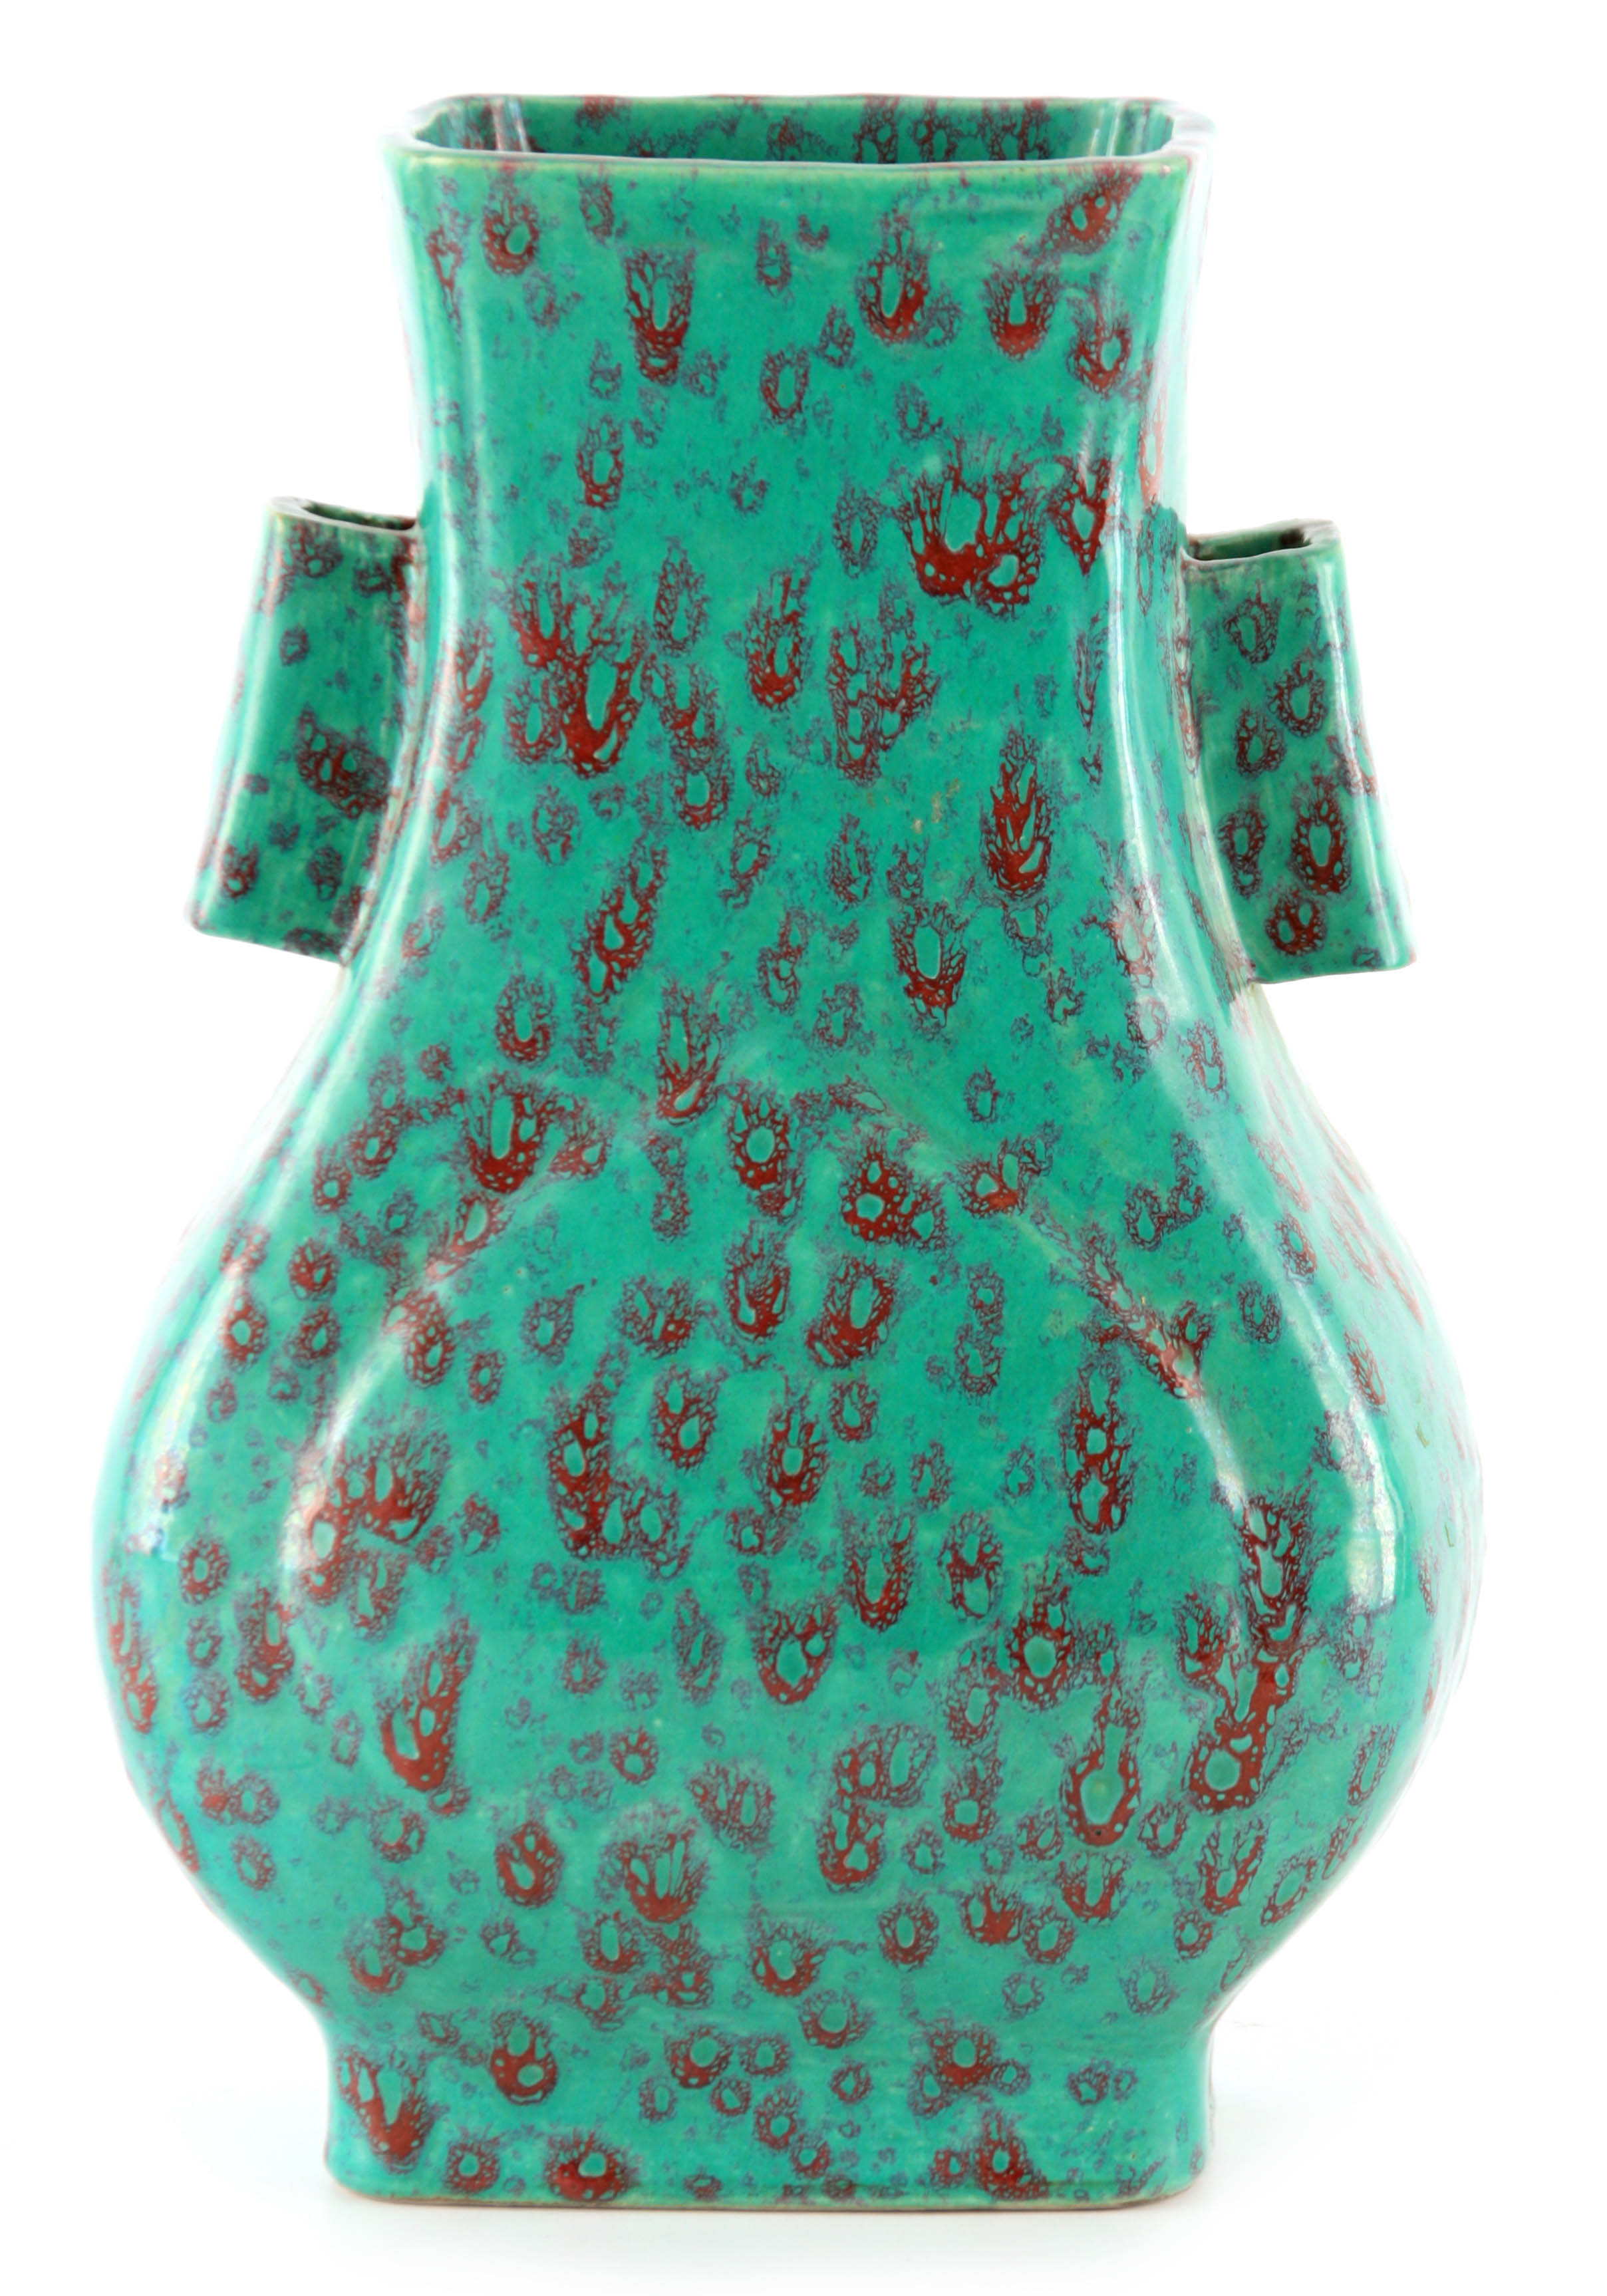 A CHINESE SQUARE SHAPED PORCELAIN VASE WITH TURQUOISE AND SPLASHED RED GLAZE - signed with character